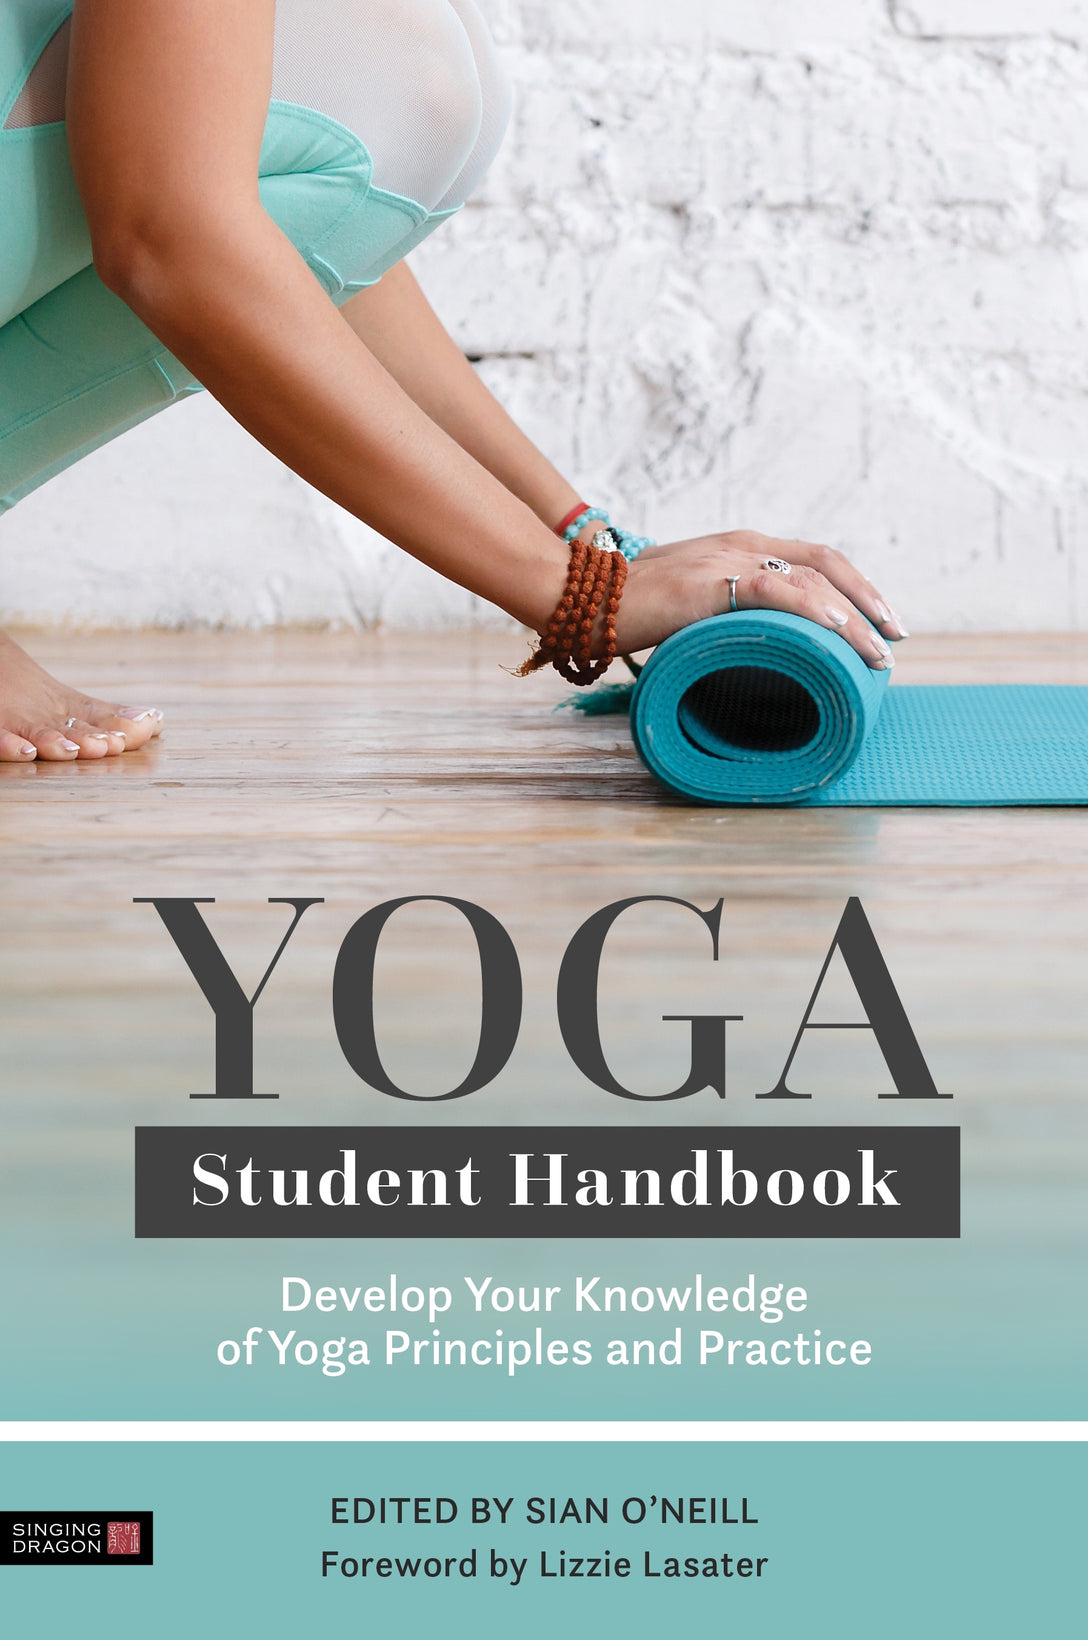 Yoga Student Handbook by Sian O'Neill, Lizzie Lasater, No Author Listed